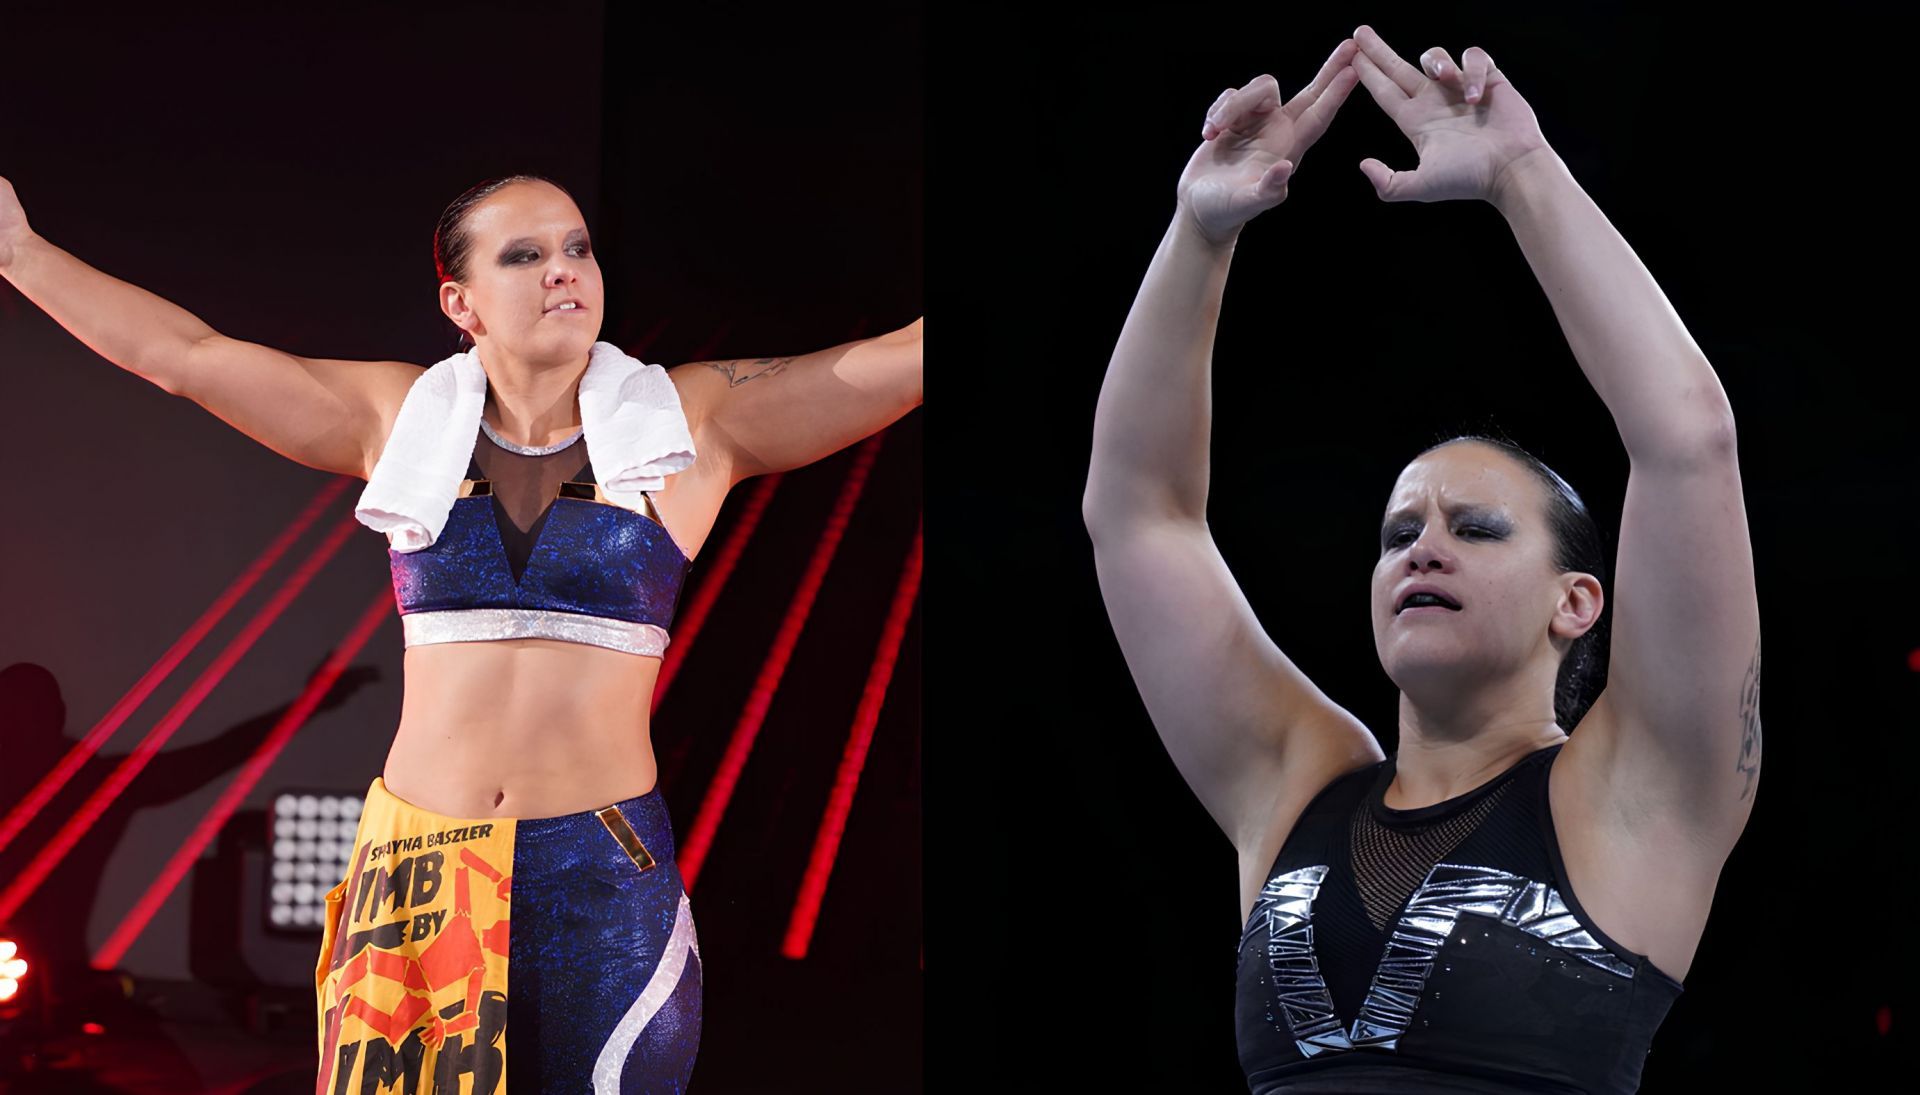 Shayna Baszler is currently drafted on RAW